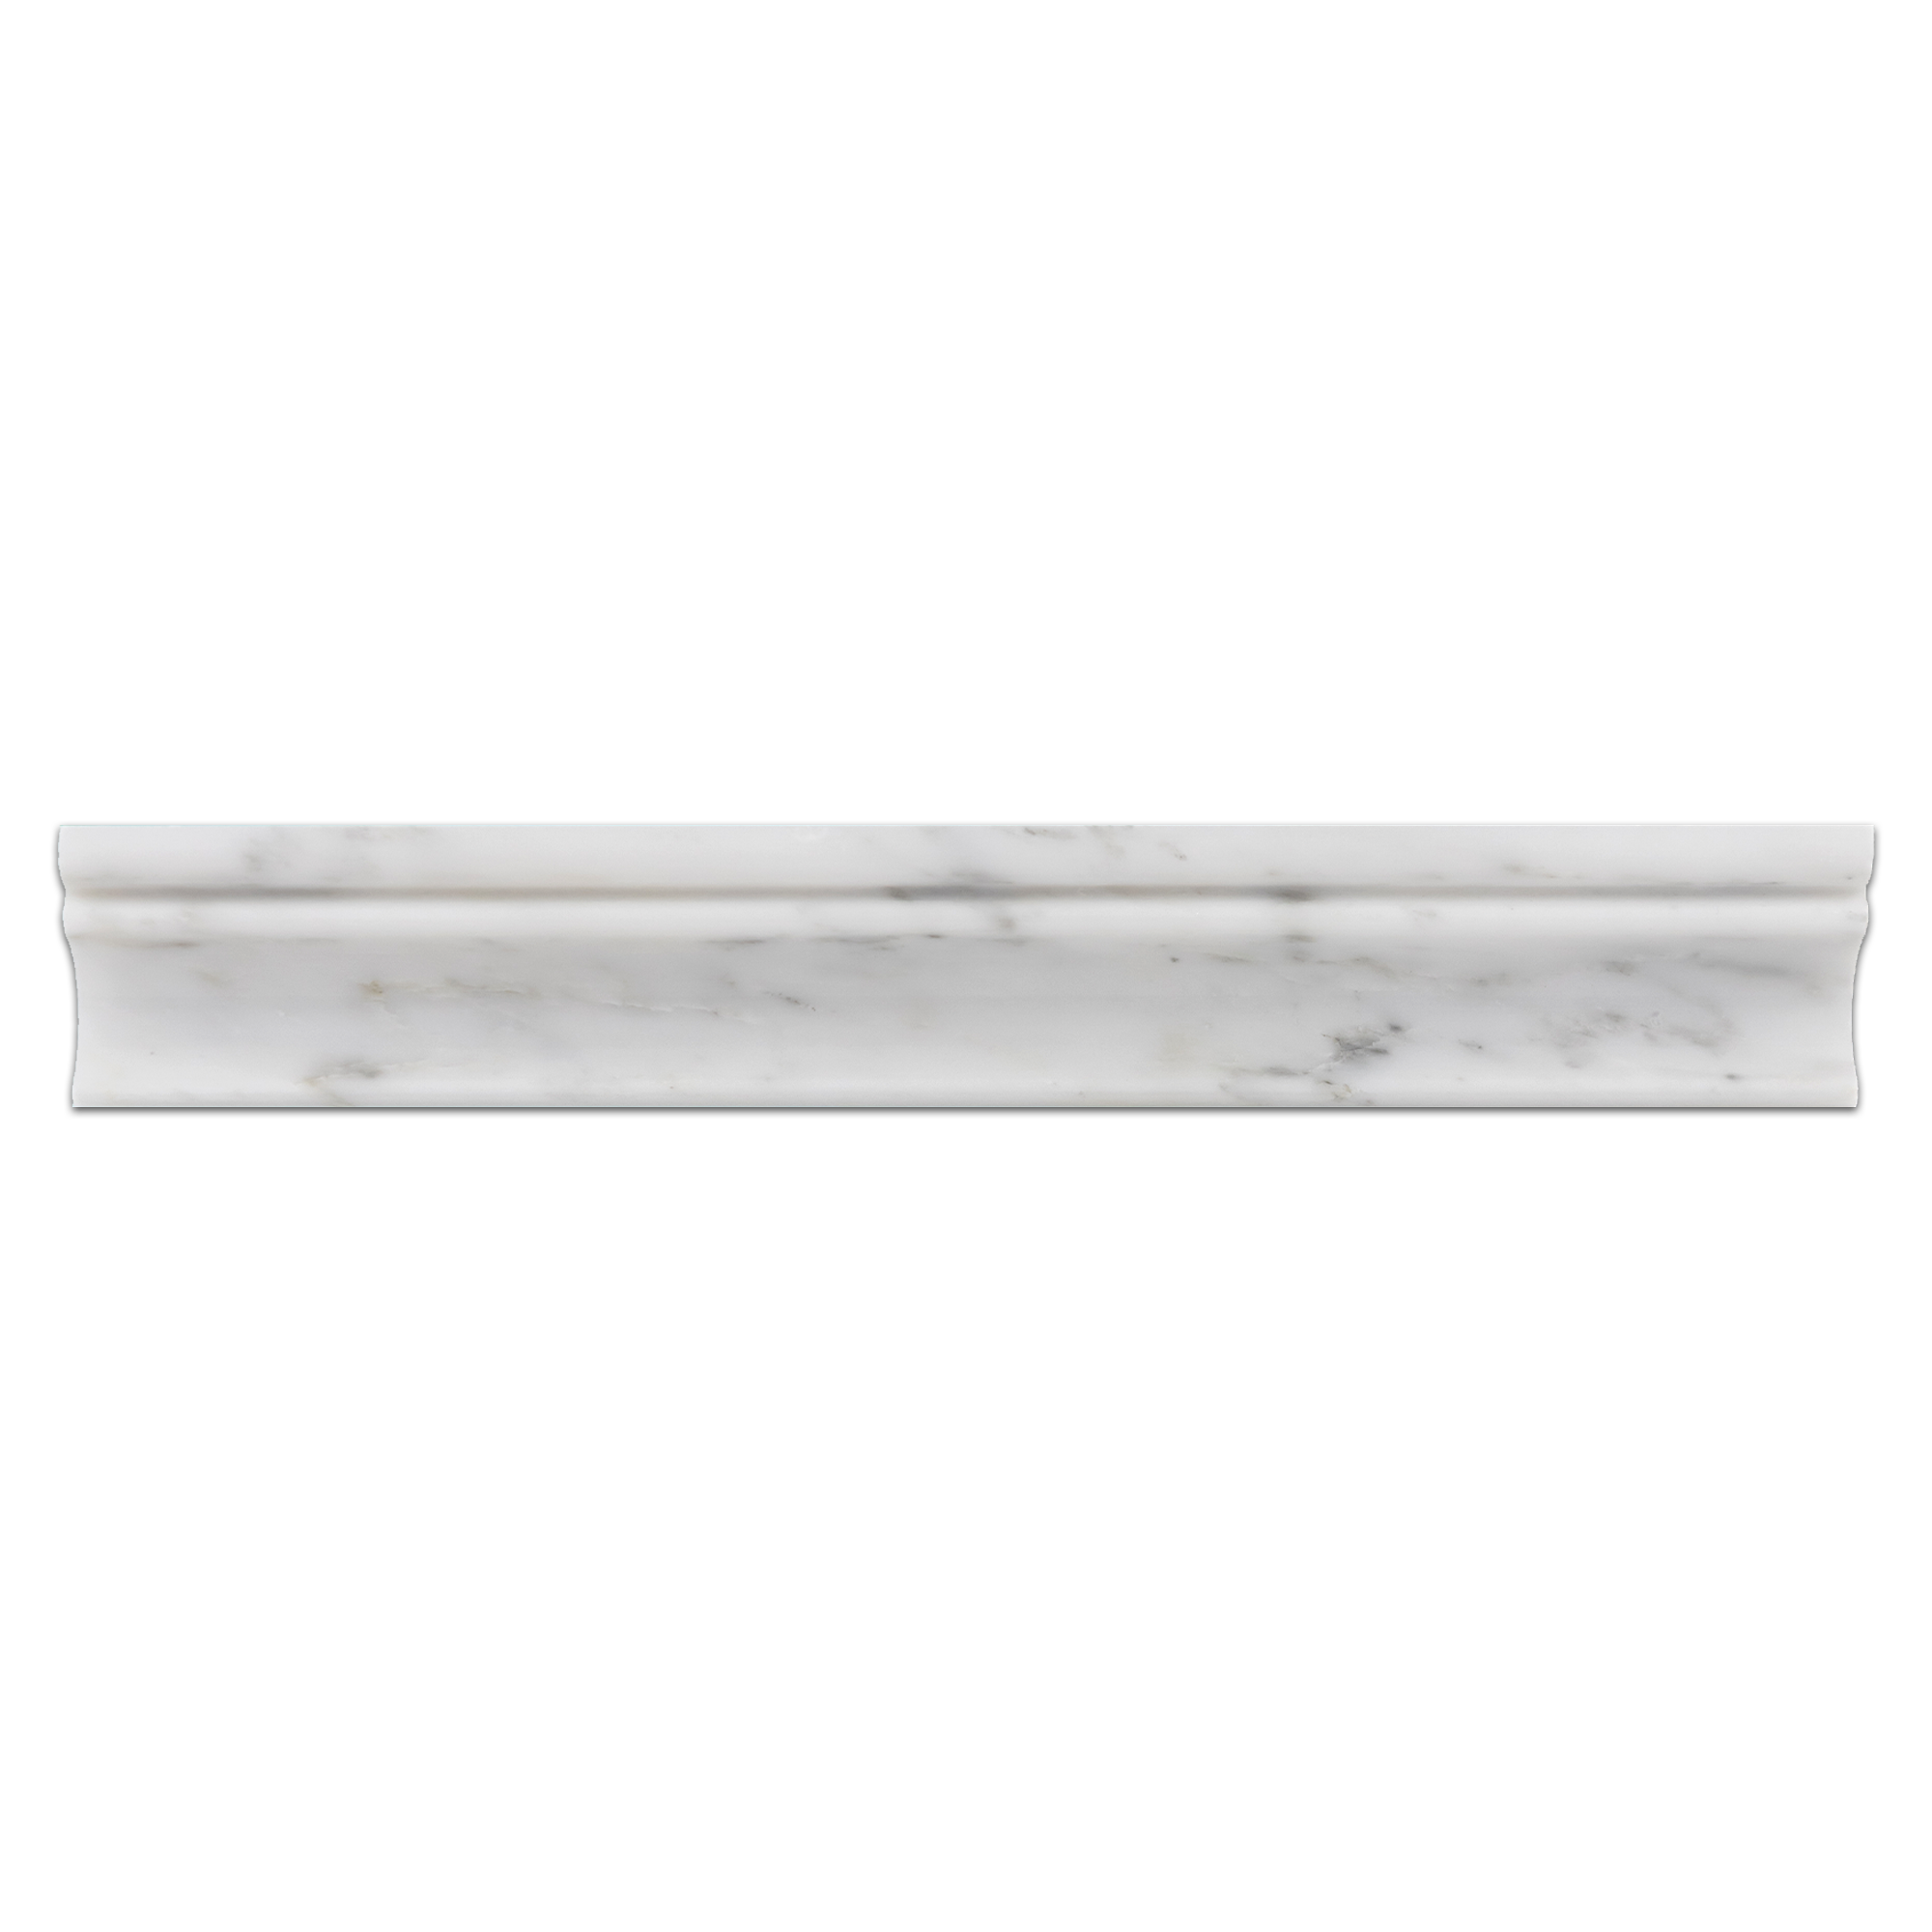 Elon Pearl White Marble Crown 2x12 Polished Tile - Surface Group Online Store